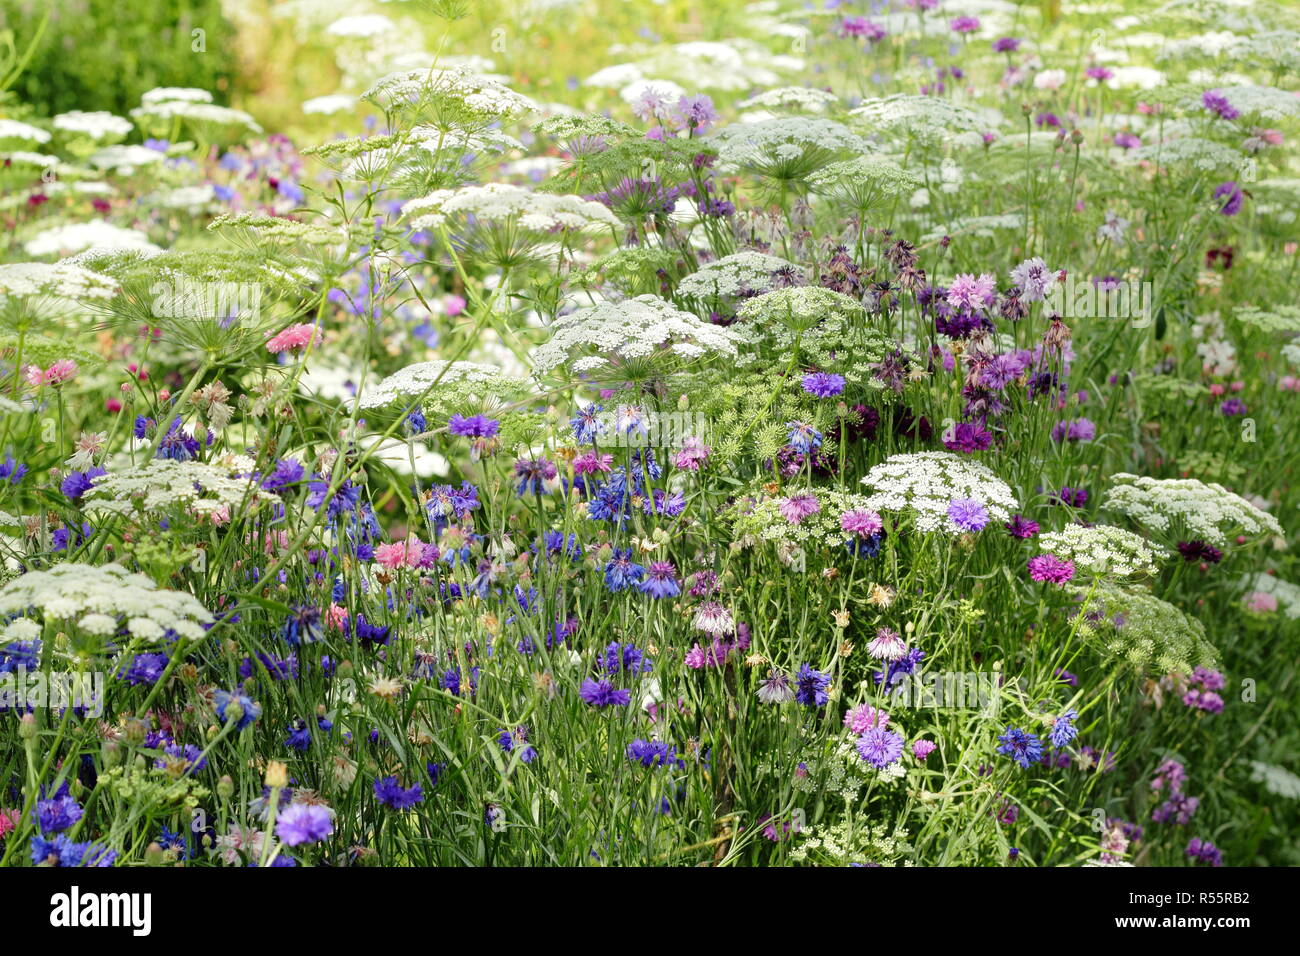 Summer display of flowers for cutting in 'The Pickery' at Easton Walled Garden, Easton, Lincolnshire, England, UK. Ammi majus, cornflowers and more. Stock Photo